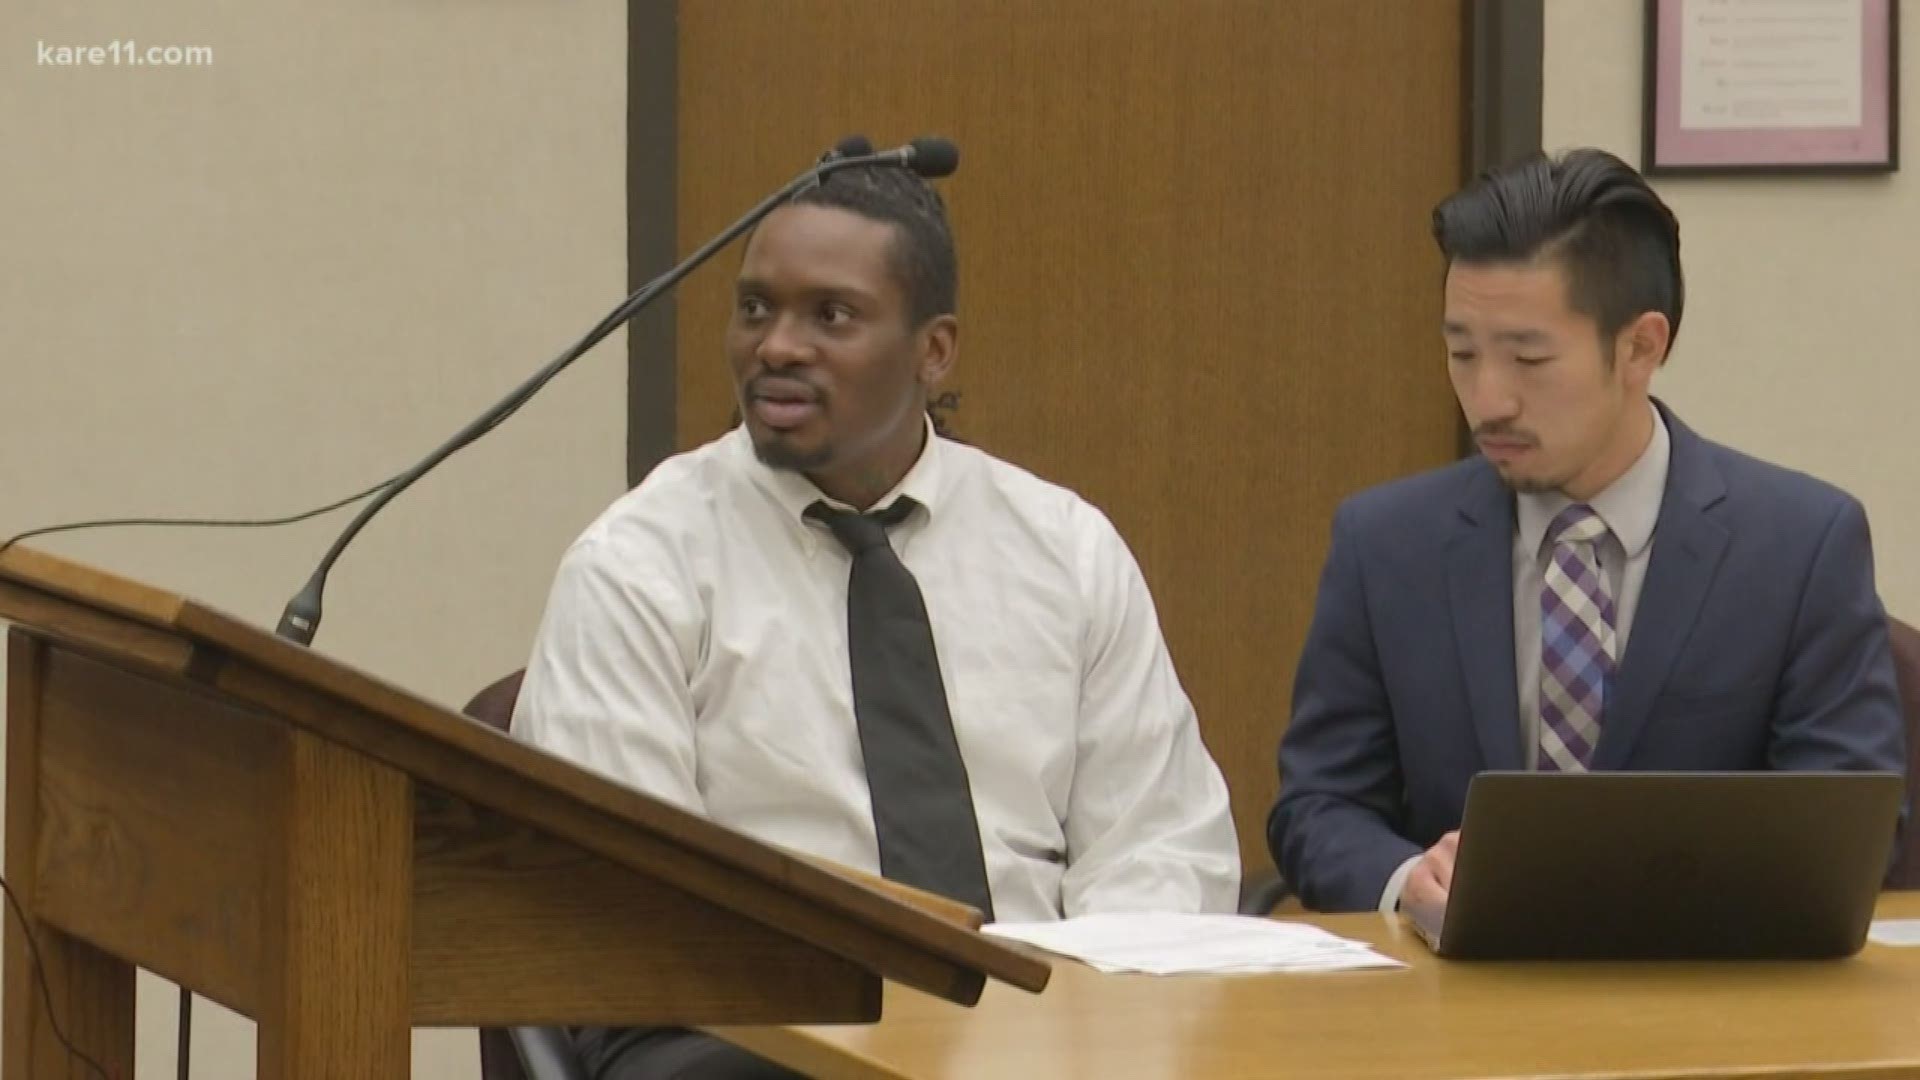 Marquell Johnson maintains his innocence after he was convicted of a Minneapolis drive-by shooting in August.